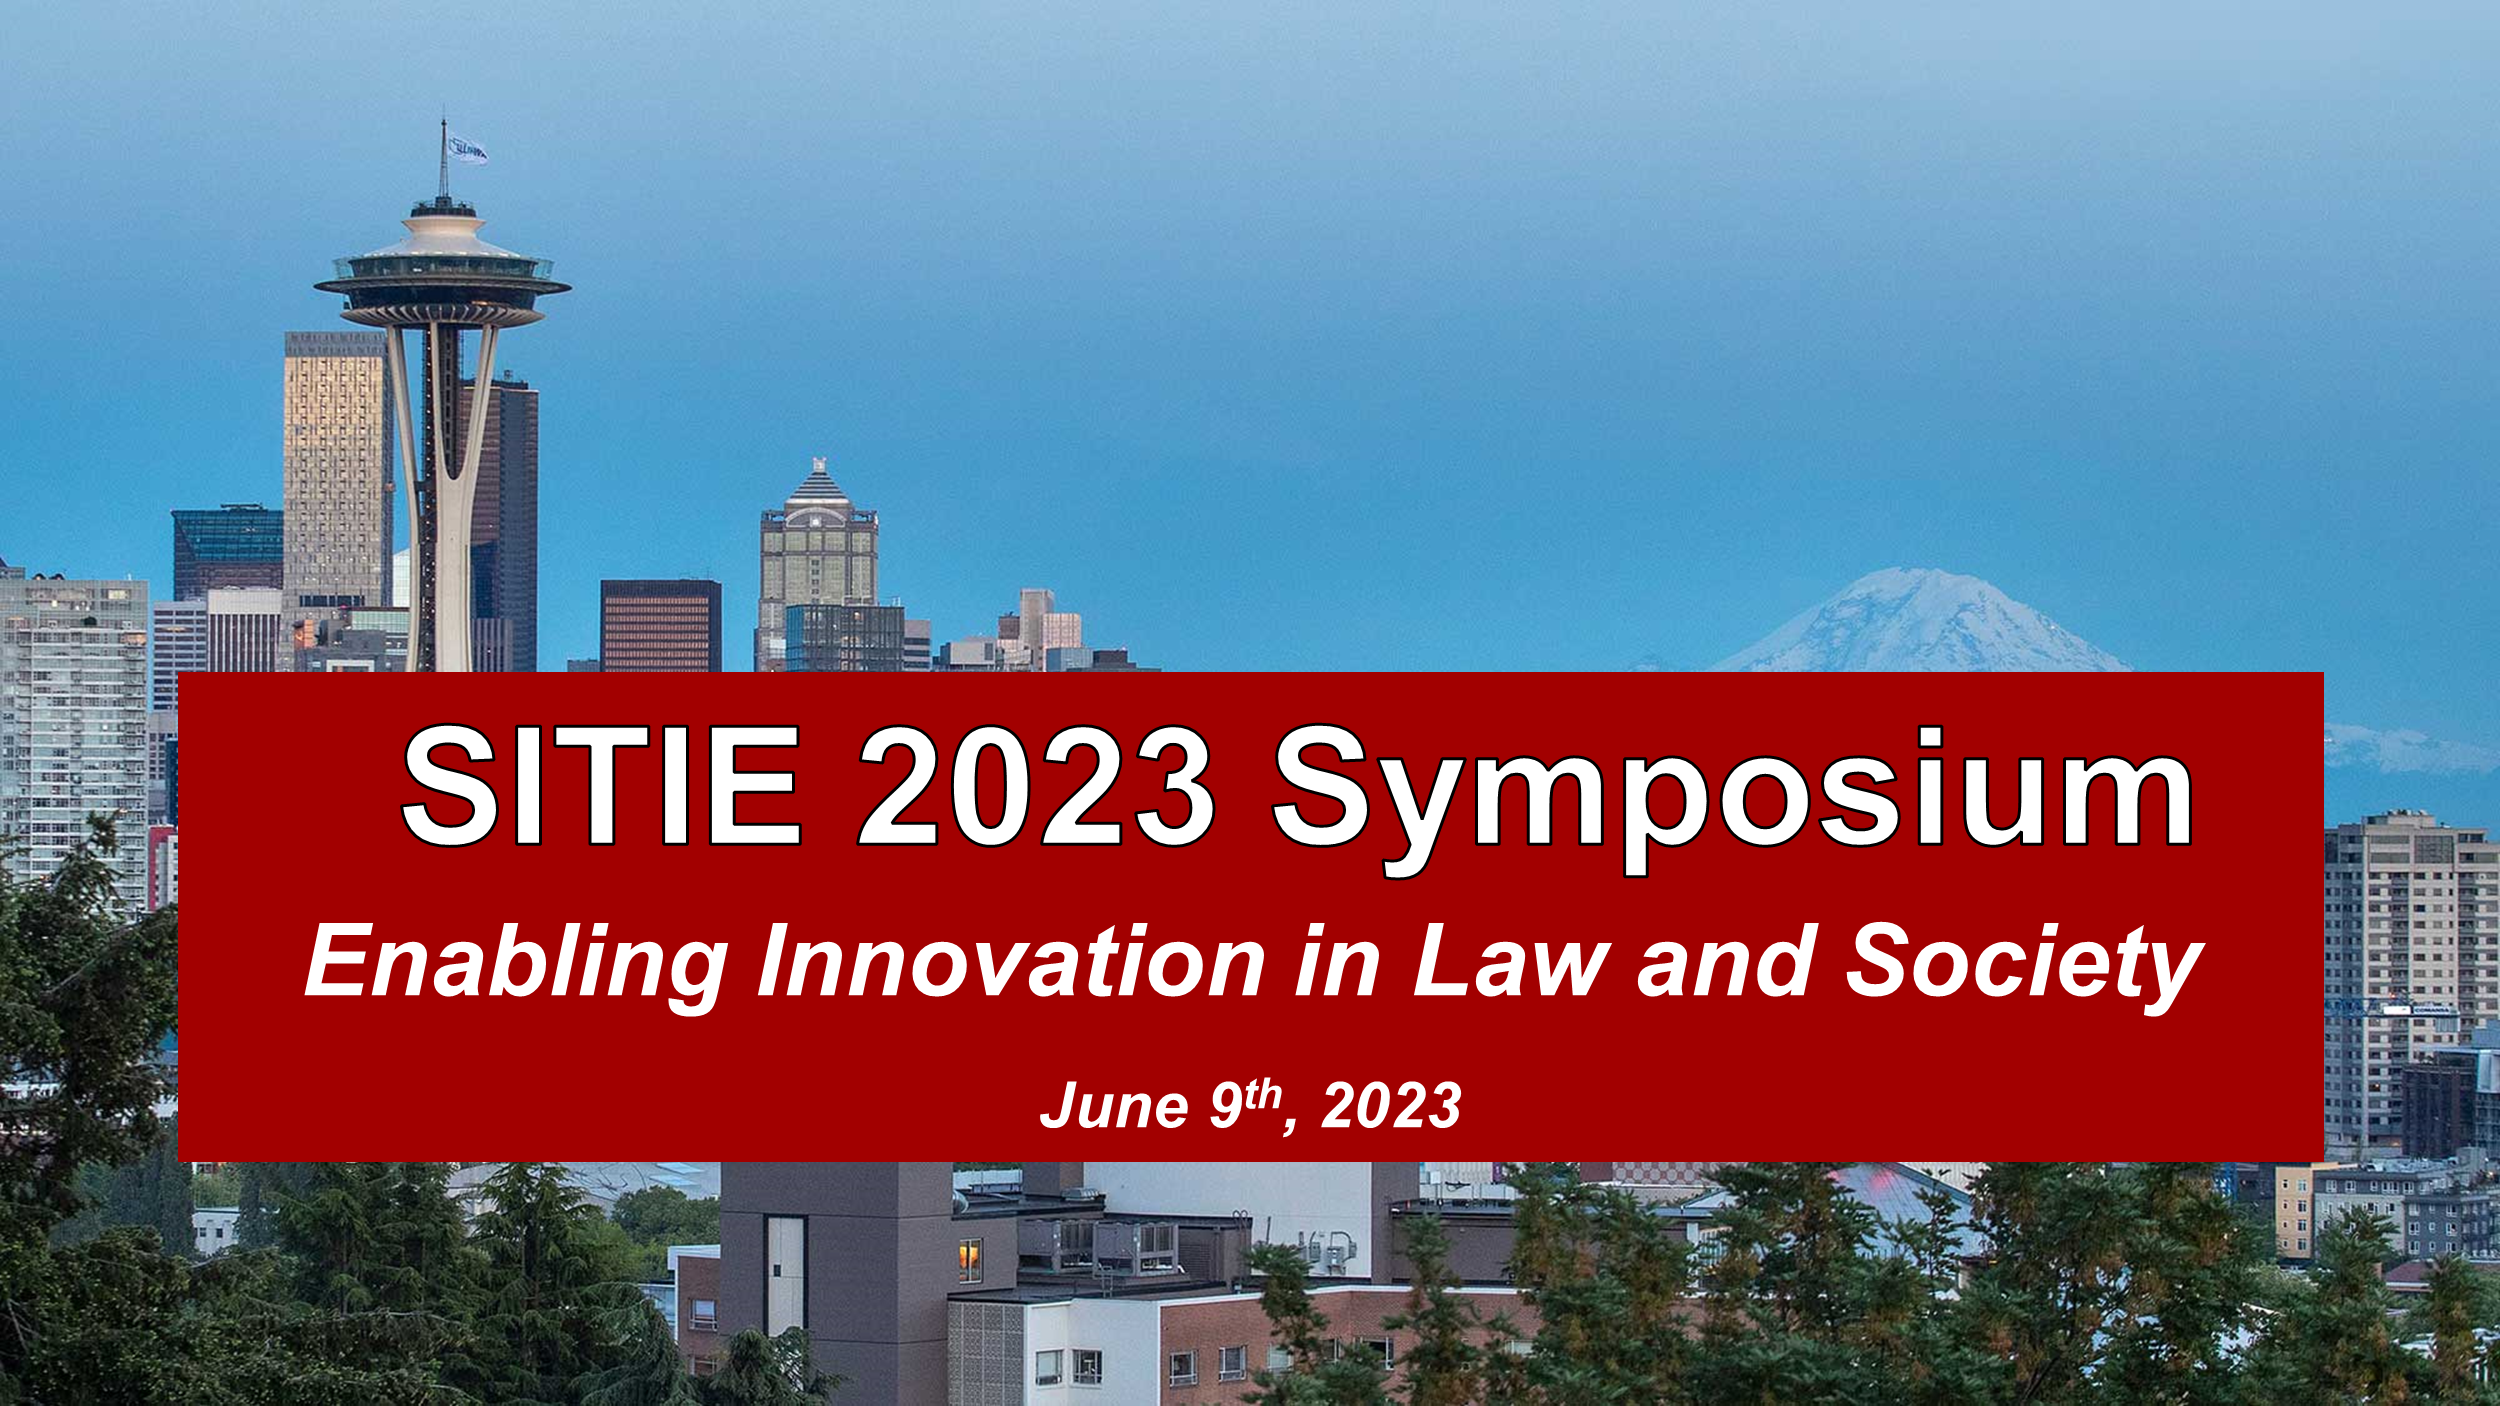 SITIE2023 Symposium: Enabling Innovation in Law and Society